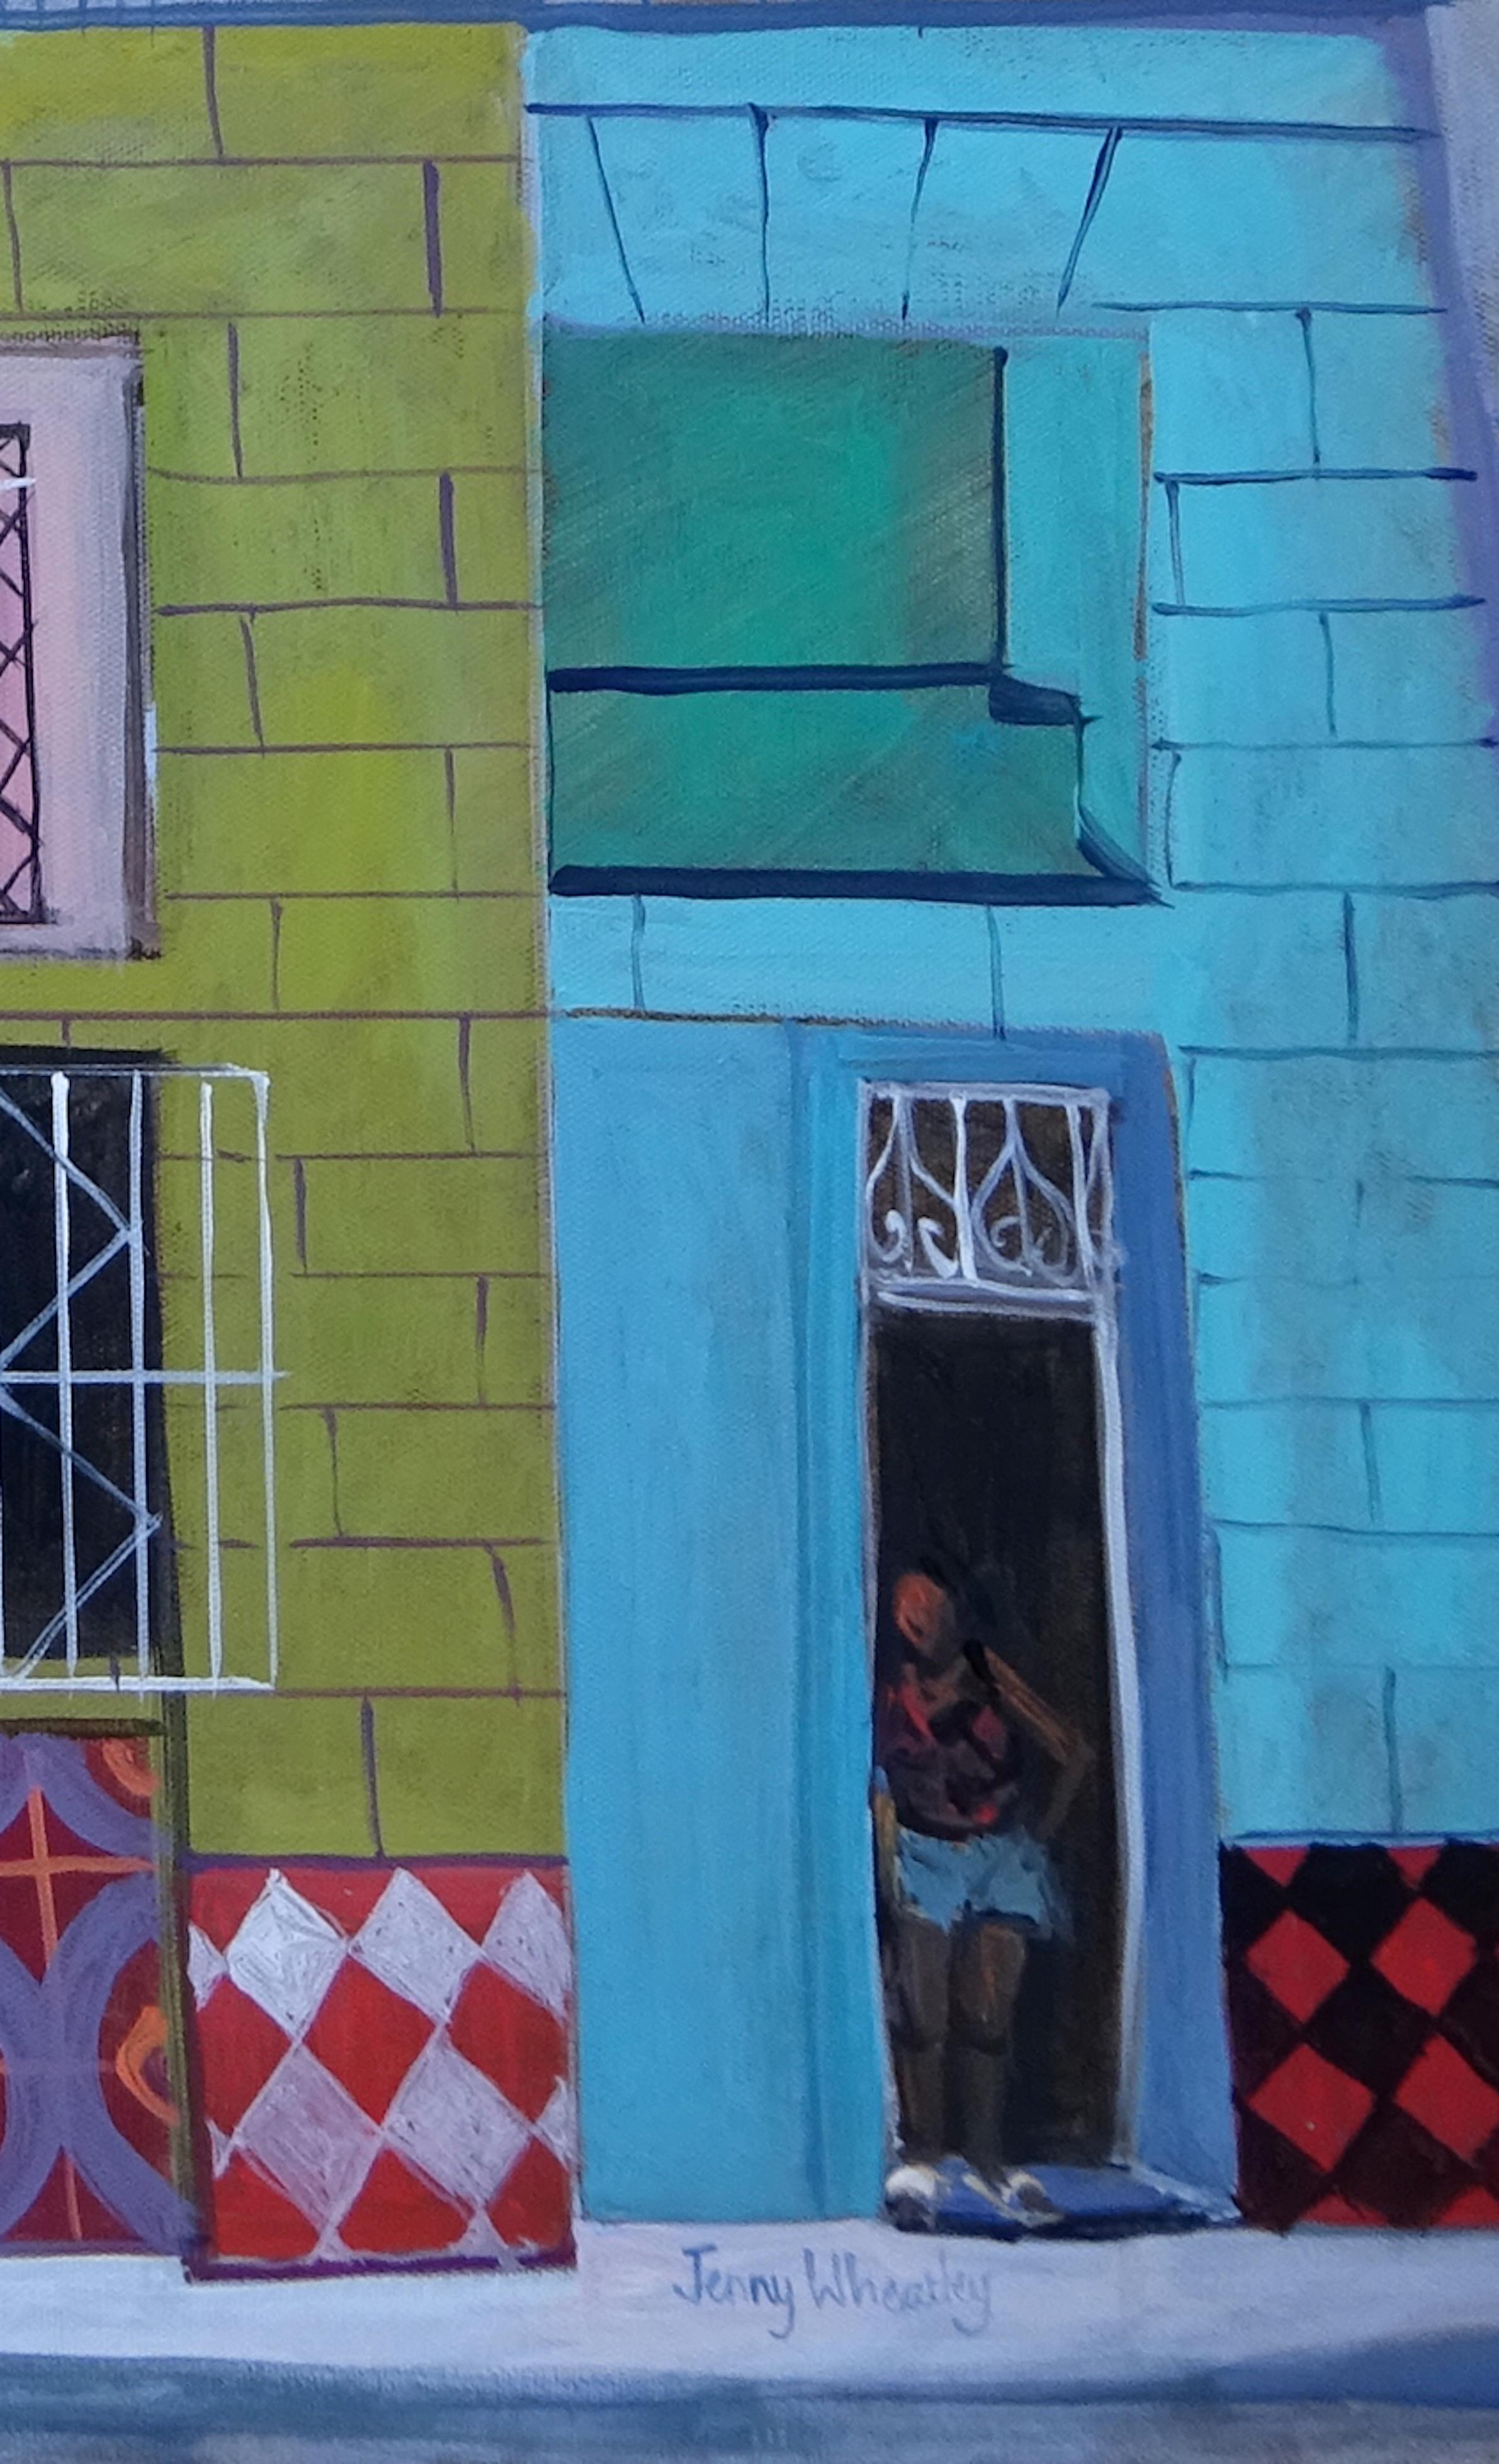 Contemporary Modern Cuban Landscape Painting 'Waiting for a Fare' Jenny Wheatley 2